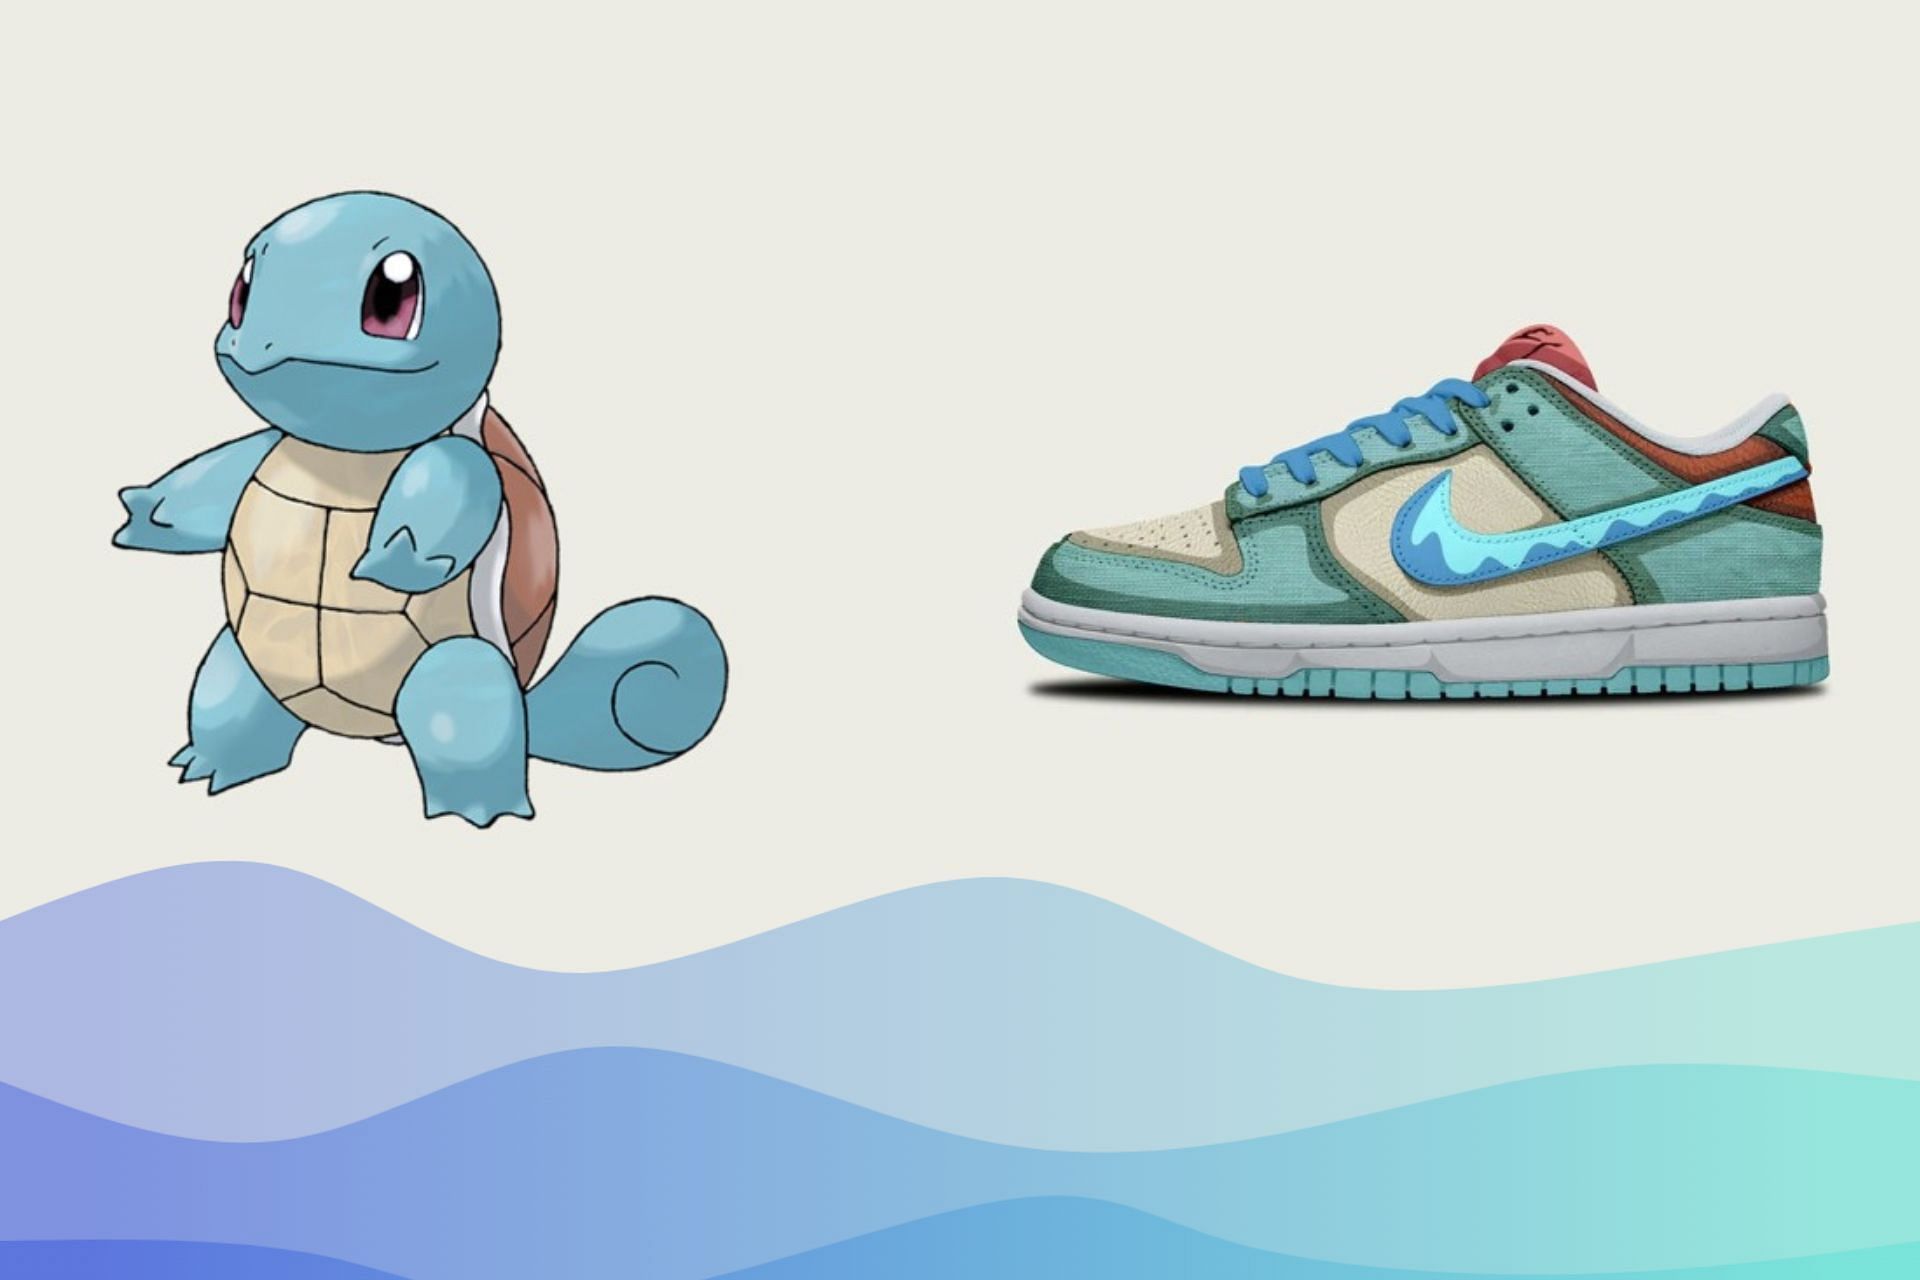 Where to buy Nike SB Low “Squirtle” shoes? we know so far